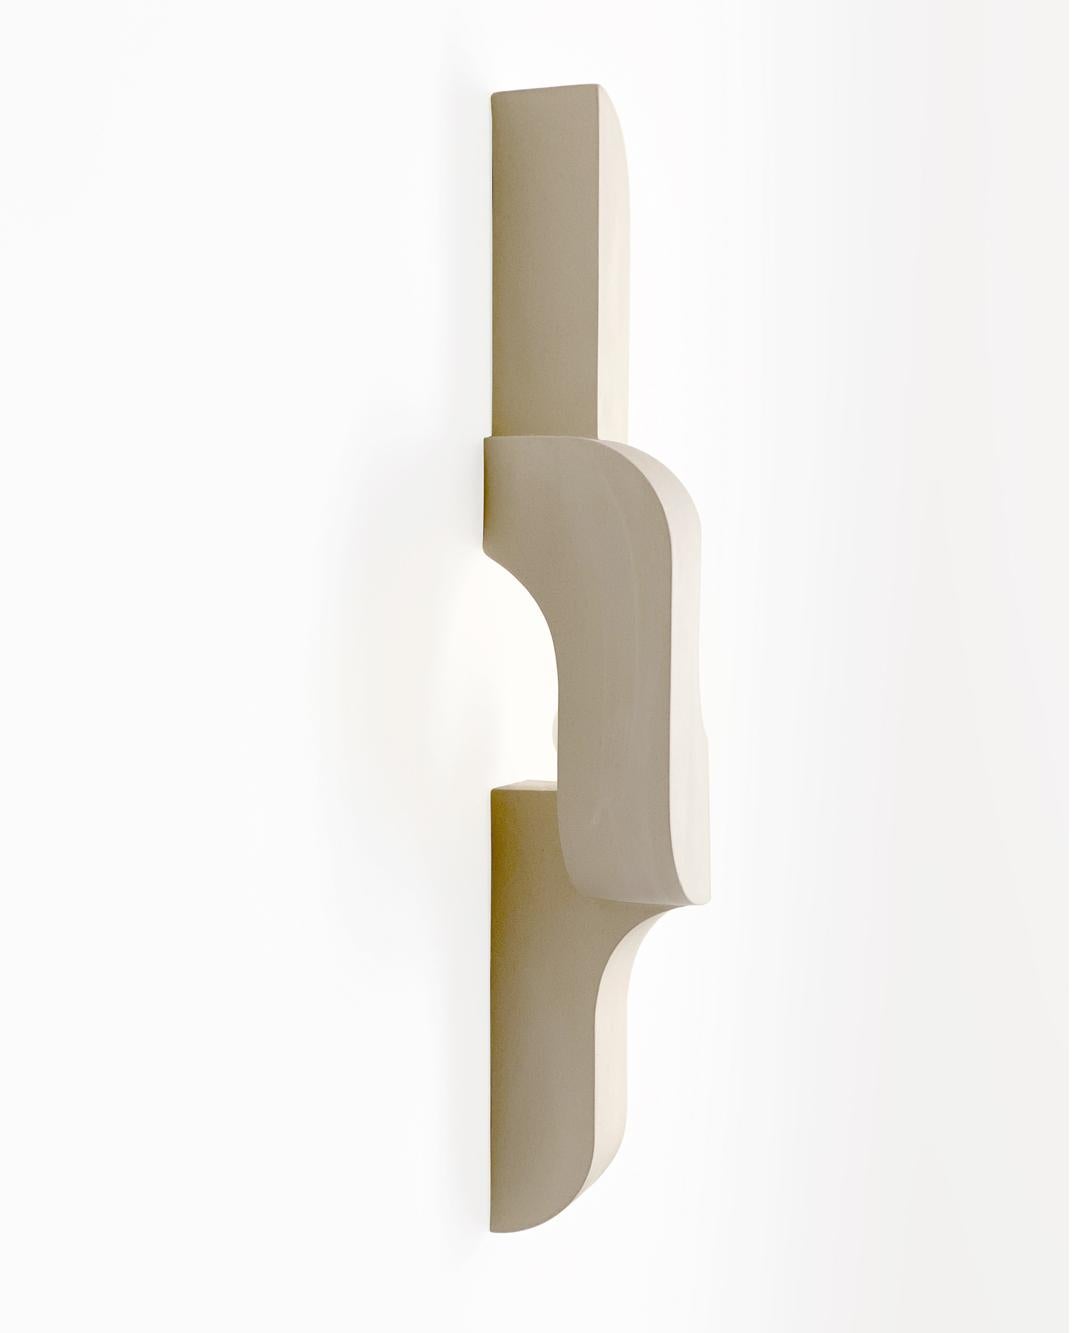 Serpentine Ceramic Wall Sconce - Mirrored pair In New Condition For Sale In Brooklyn, NY